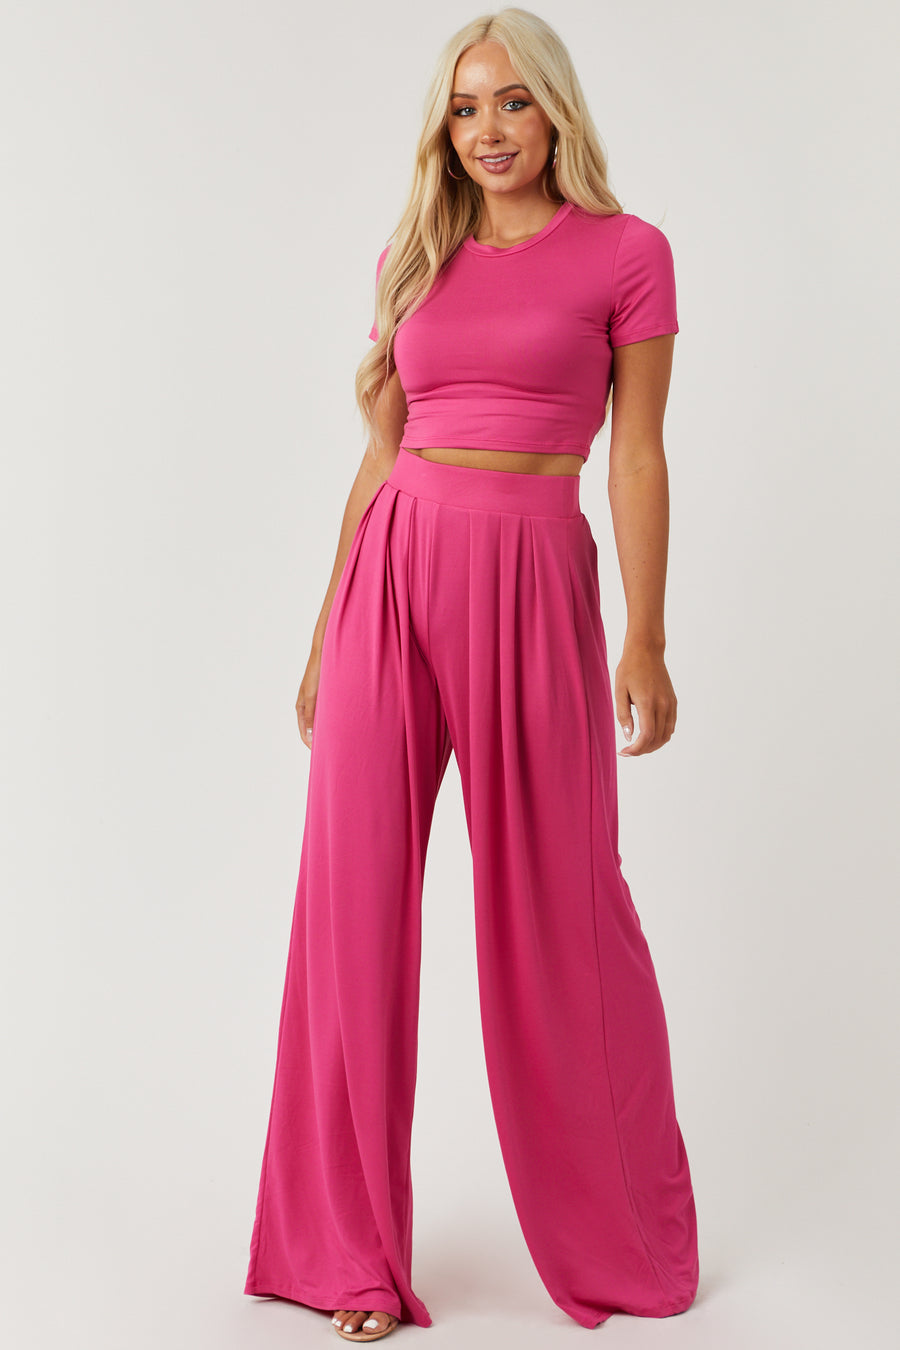 Watermelon Cropped Top and Palazzo Pants Set